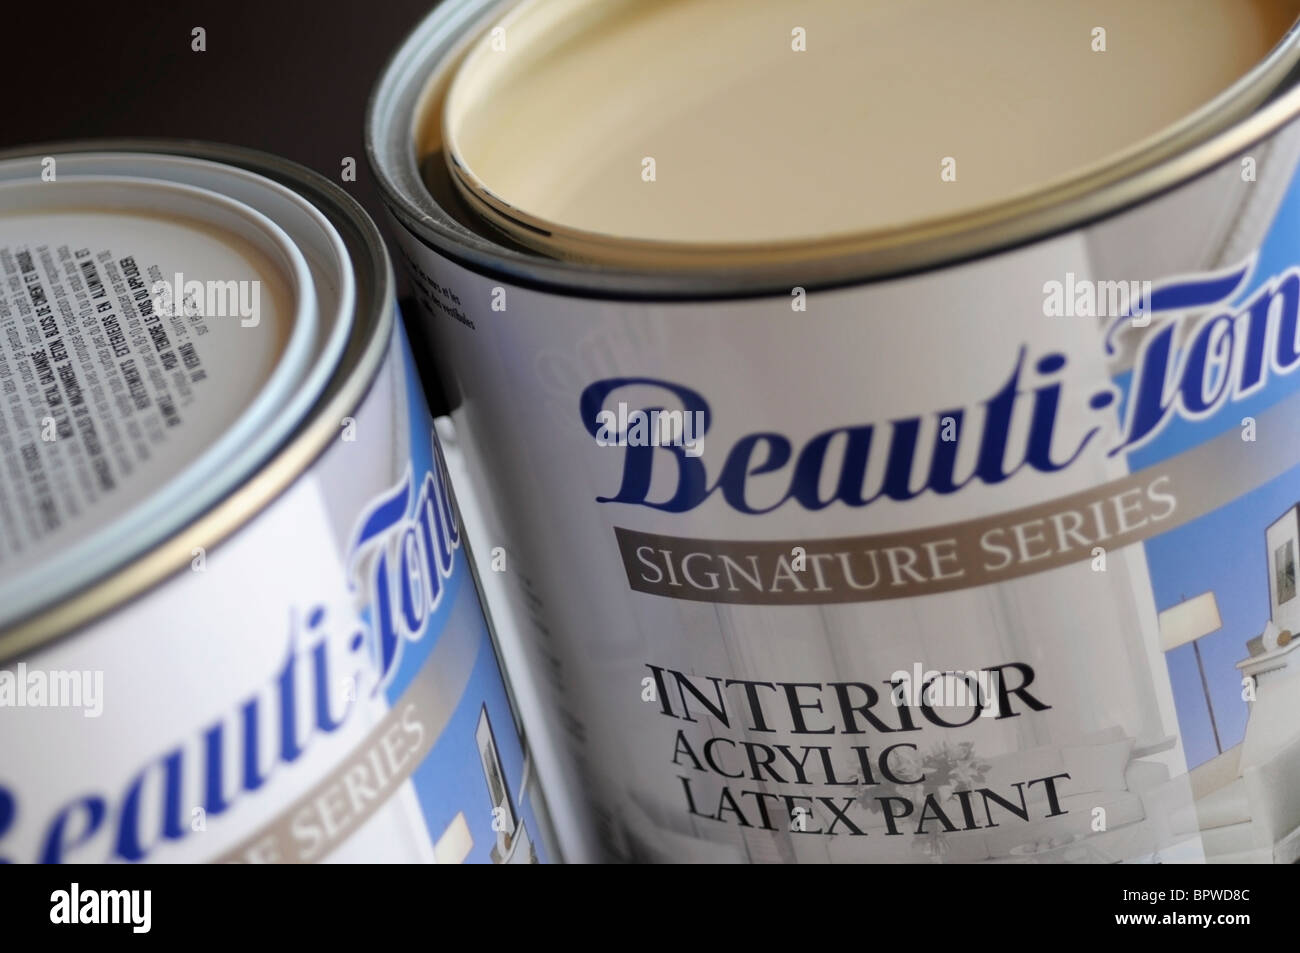 Paint Cans Stock Photo